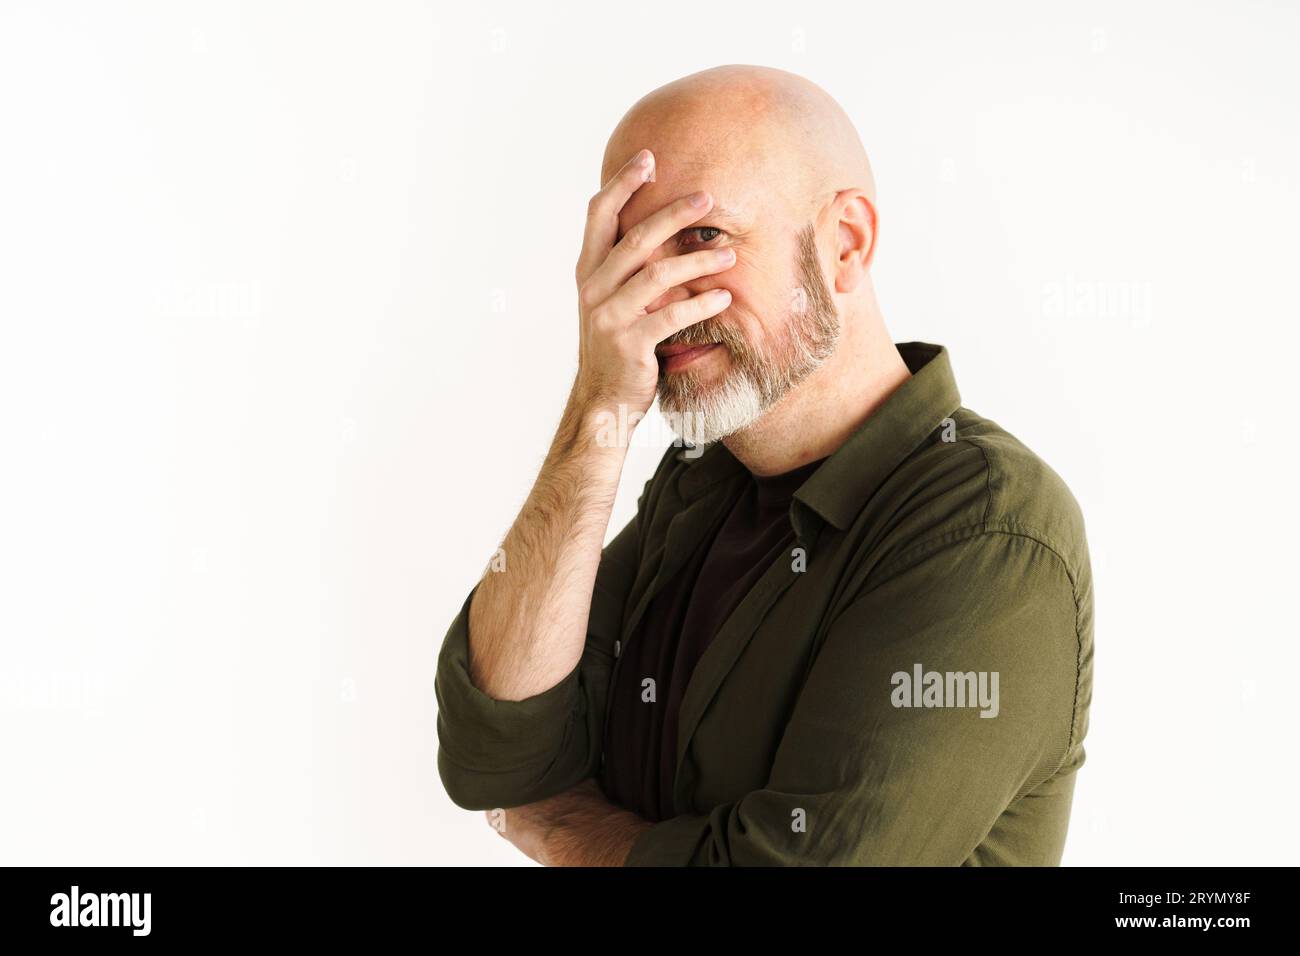 Mature man with silver beard in moment of frustration or disbelief. He puts hand on face in facepalm gesture, conveying sense of Stock Photo